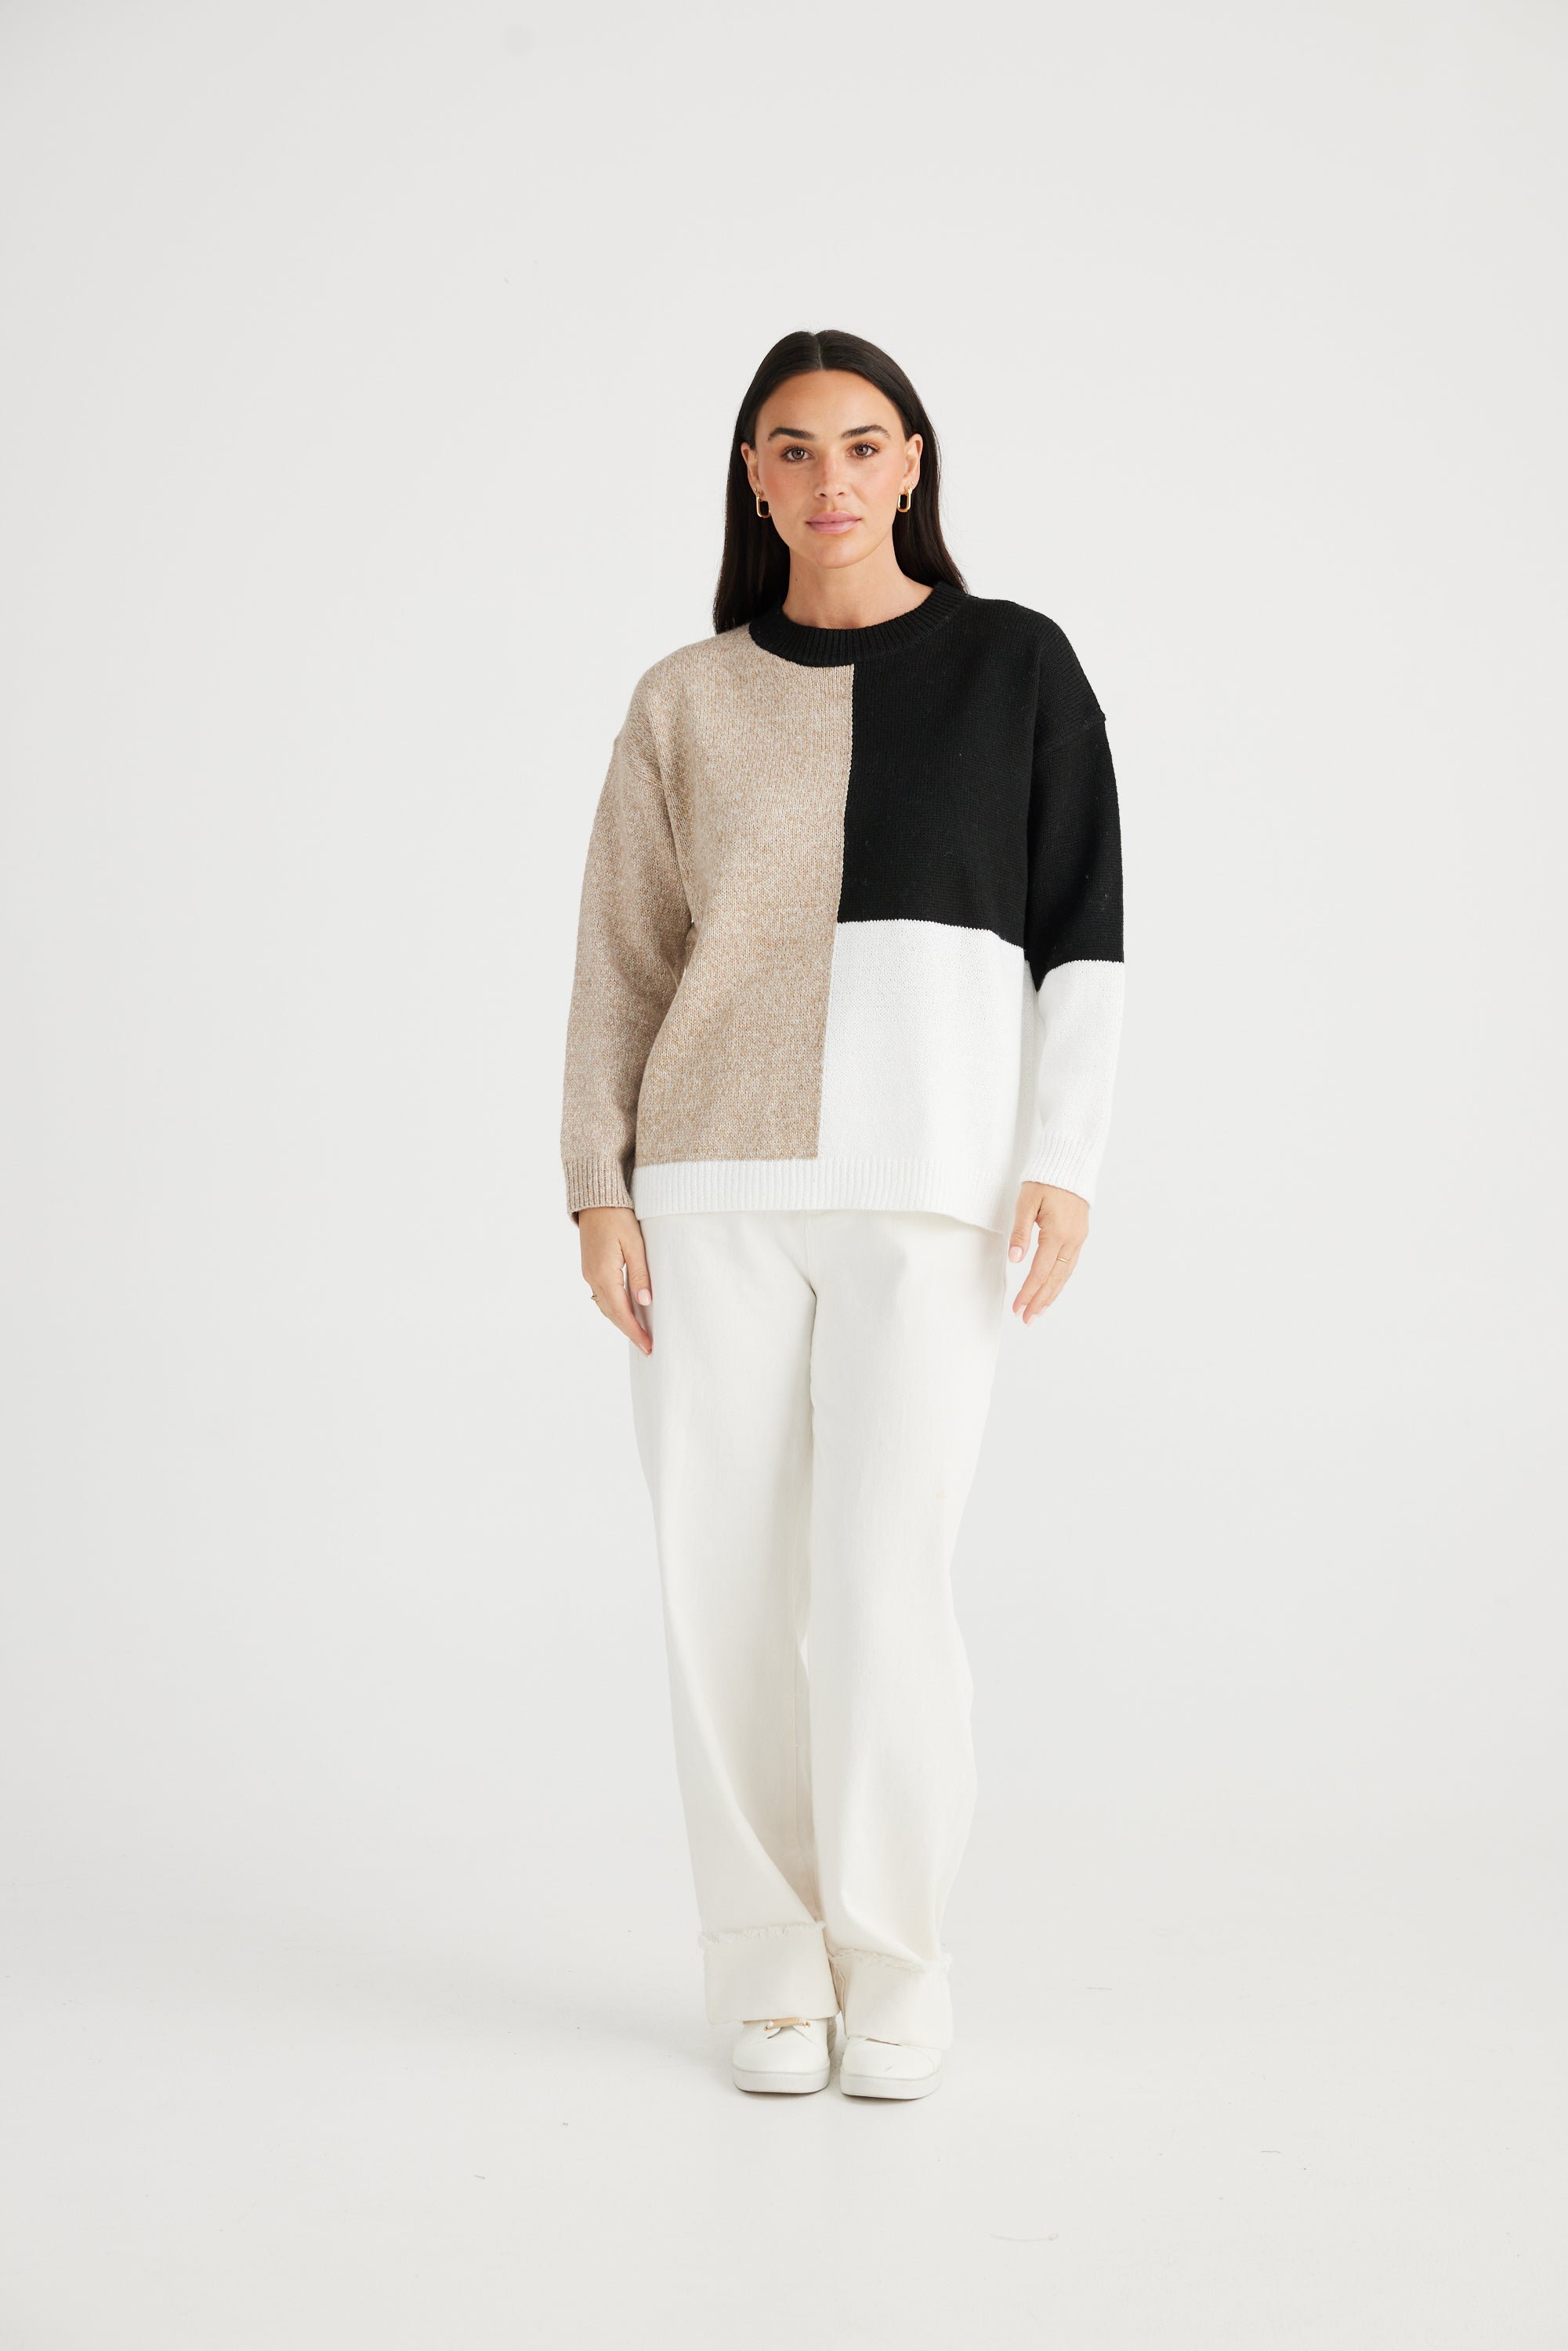 Harmony Knit - Natural-Knitwear & Jumpers-Brave & True-The Bay Room